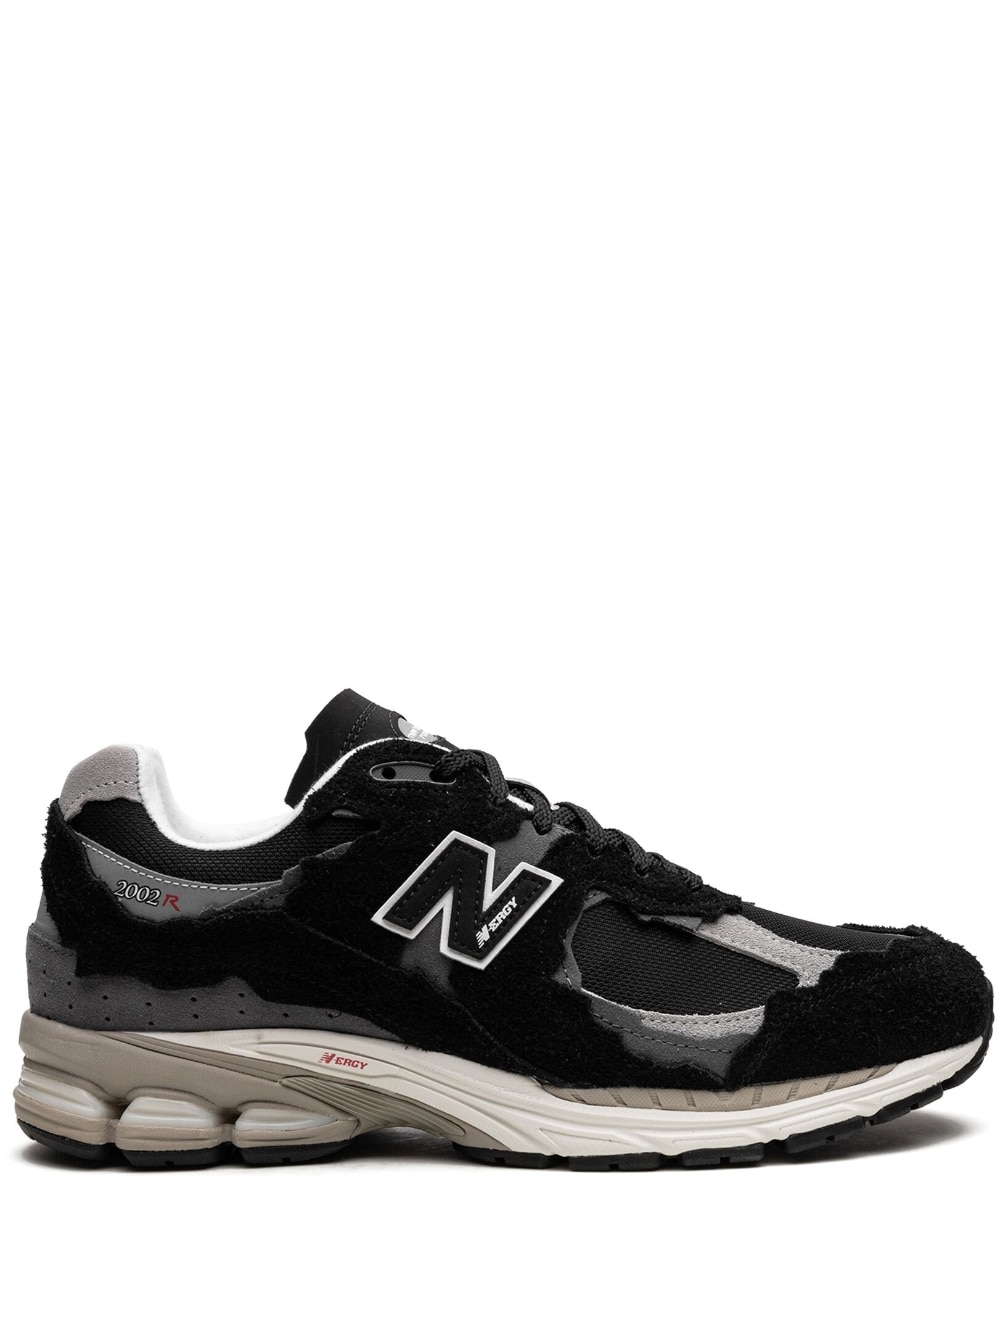 New Balance 2002R "Protection Pack - Black/Grey" sneakers